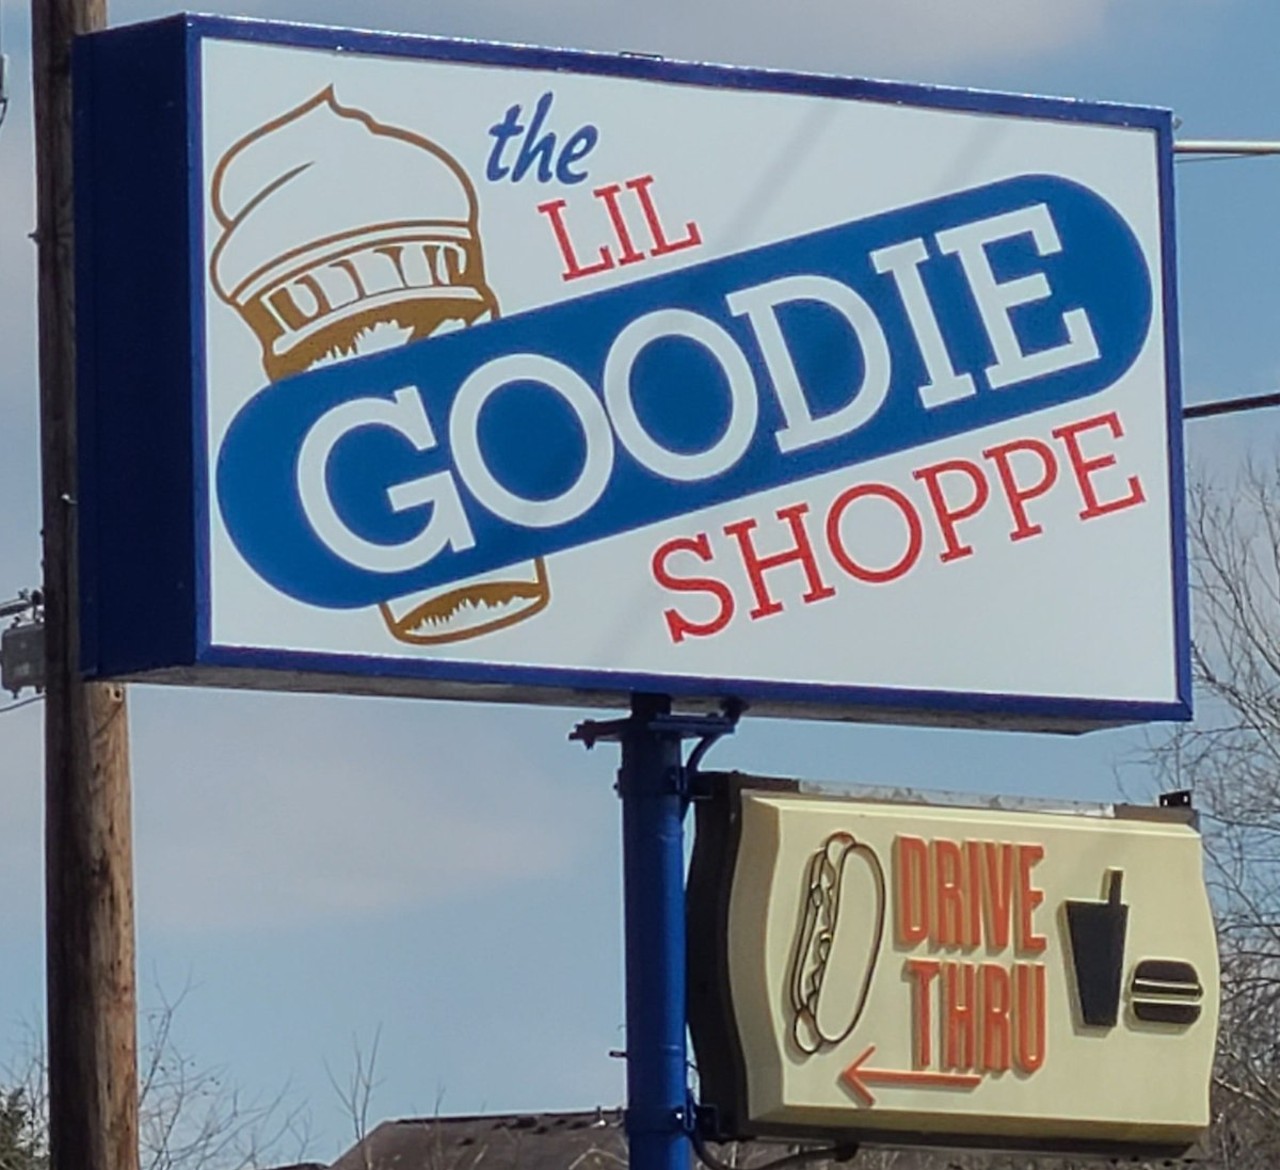 The Lil Goodie Shoppe
7120 Eagle Creek Road, Colerain Township
Open in 1983, The Lil Goodie Shoppe has been run by three generations of women from the Anderson family. Their turtle sundae is a dream come true, and they have an extensive list of ingredients you can add to your flurry, including classic candies like M&Ms, Reese’s Cups and Butterfingers, as well as real fruit. Among their specialty items, you’ll find an adorable clown cup – soft serve topped with rainbow sprinkles, candy eyes and ears and a cone hat on top – as well as a strawberry shortcake, banana split and a classic parfait.